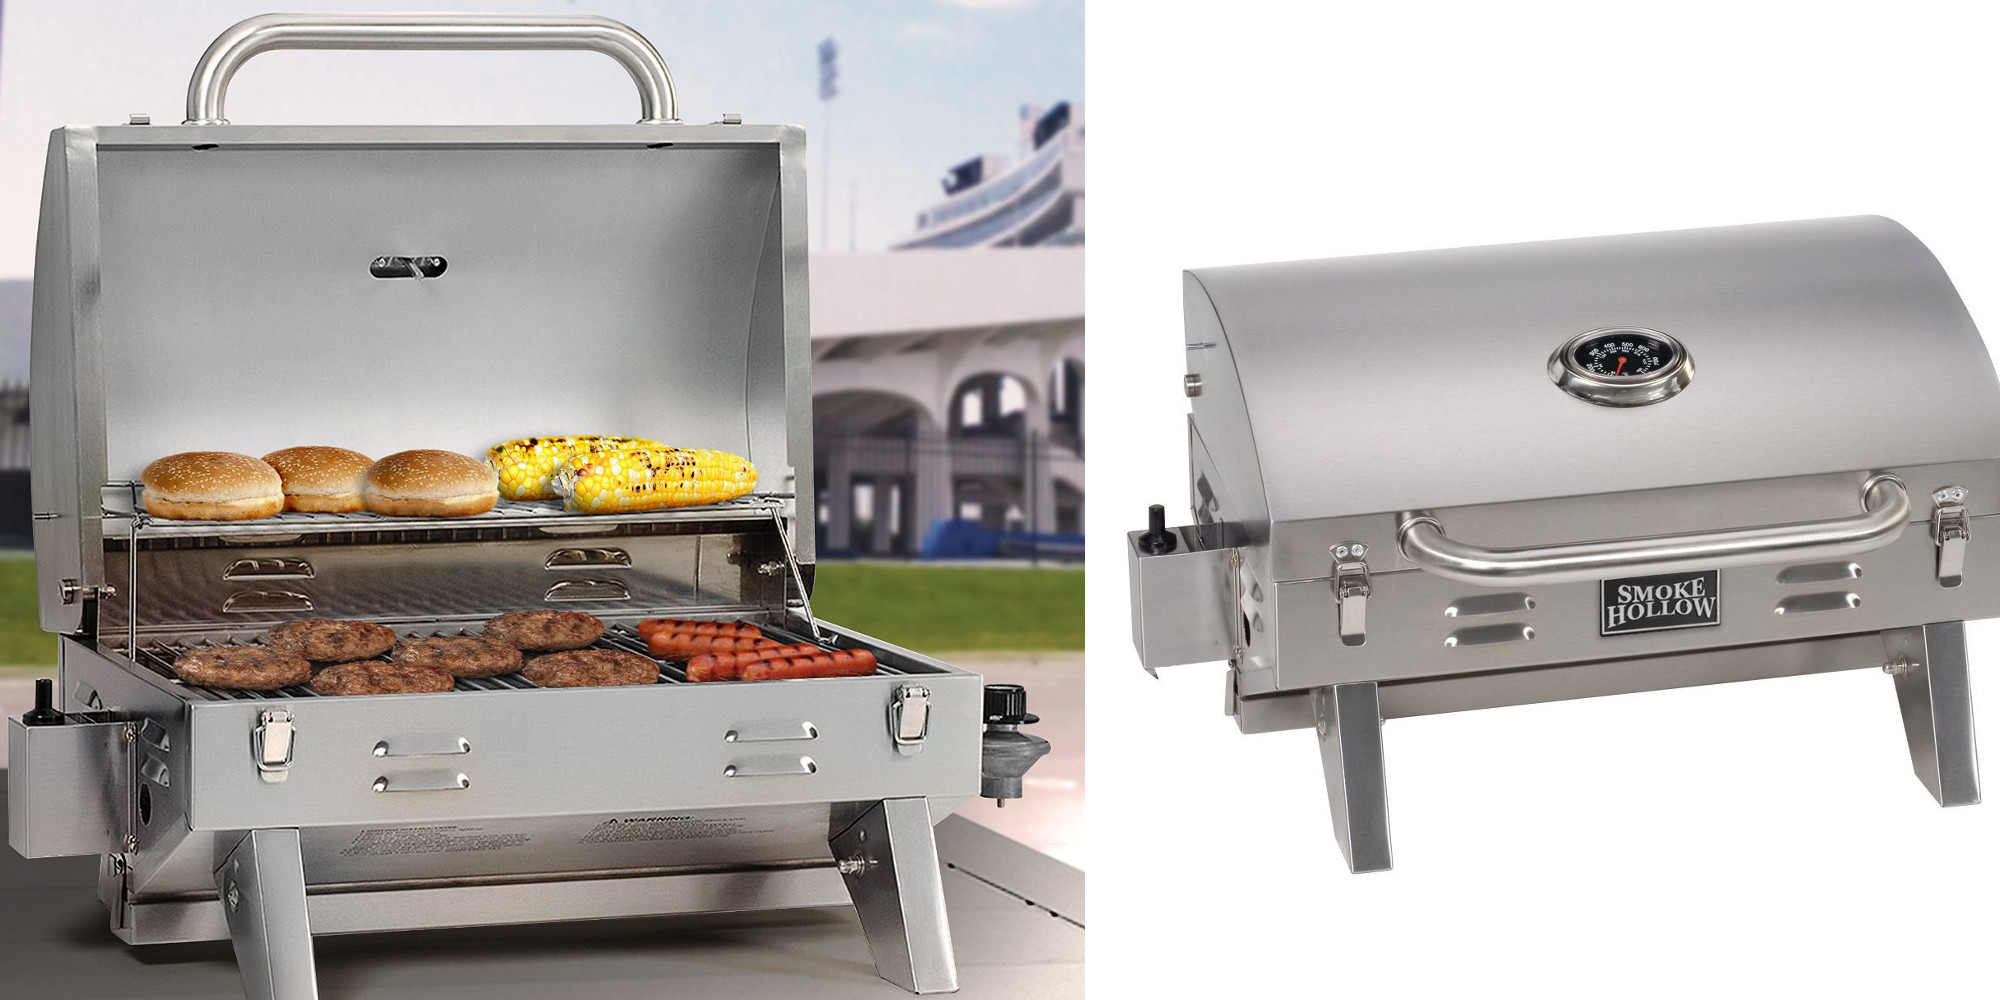 Tabletop Propane Gas Grill from Smoke Hollow for $75 ...